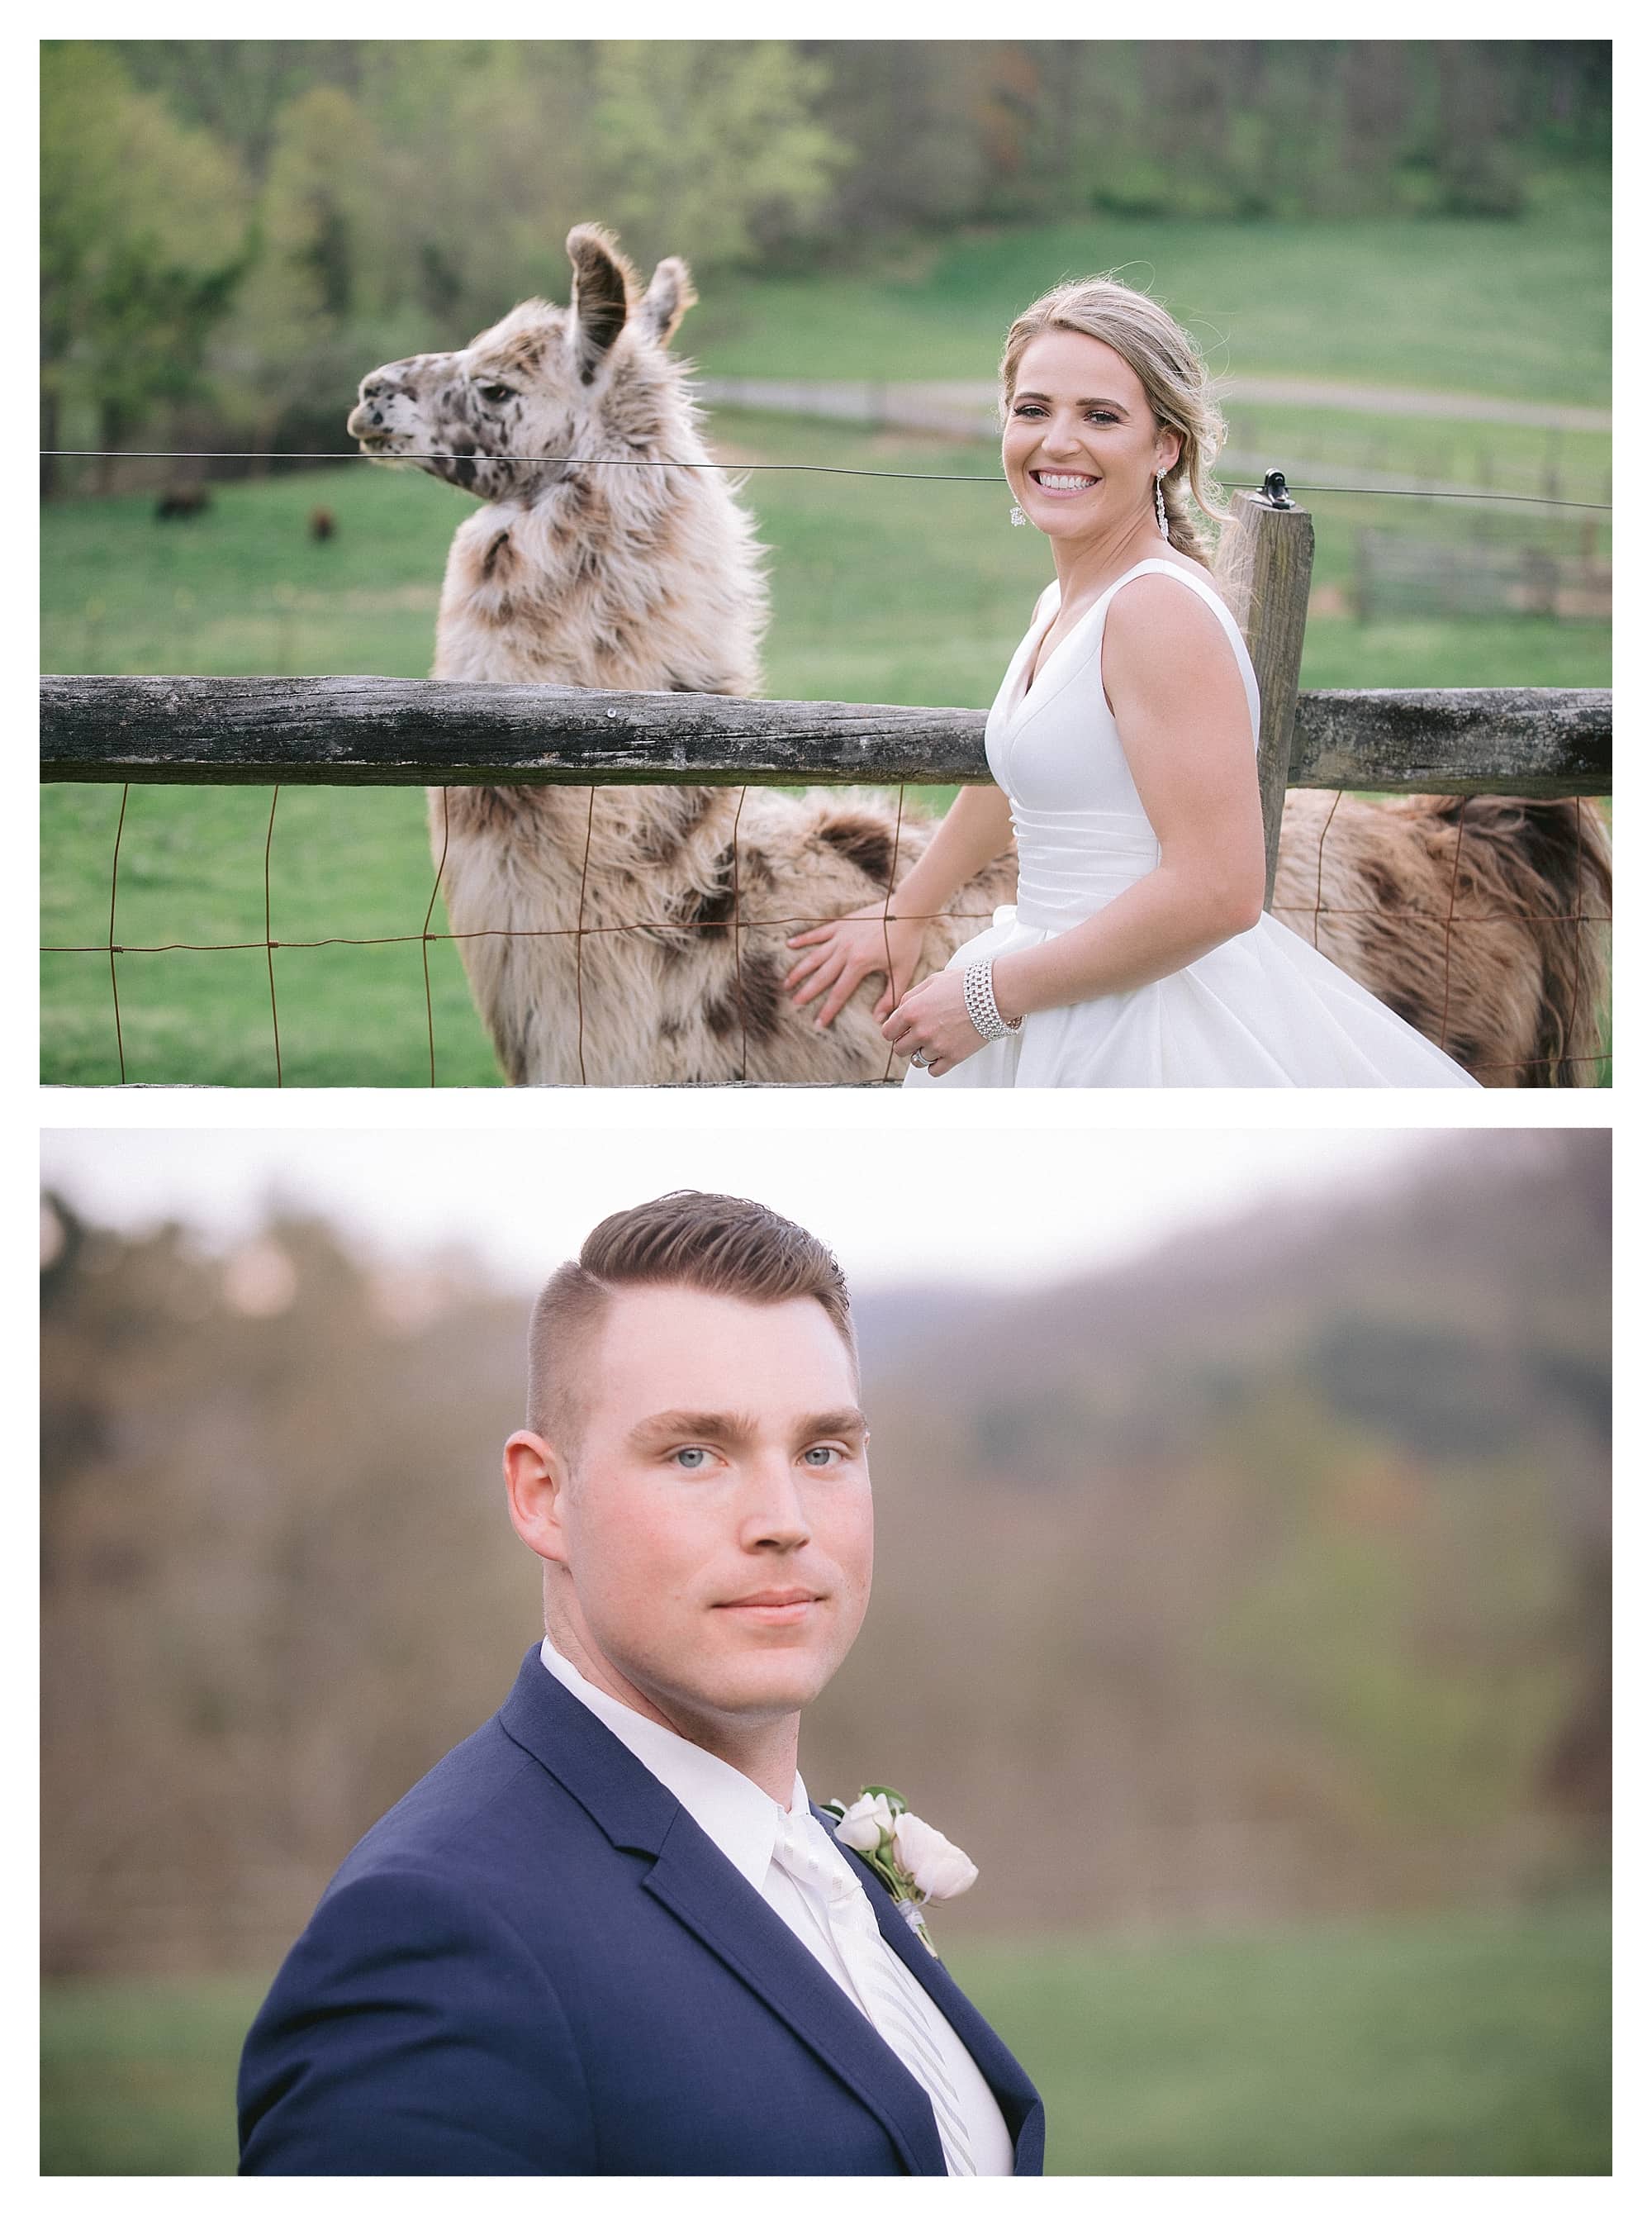 Bride and groom close up photos in grassy field